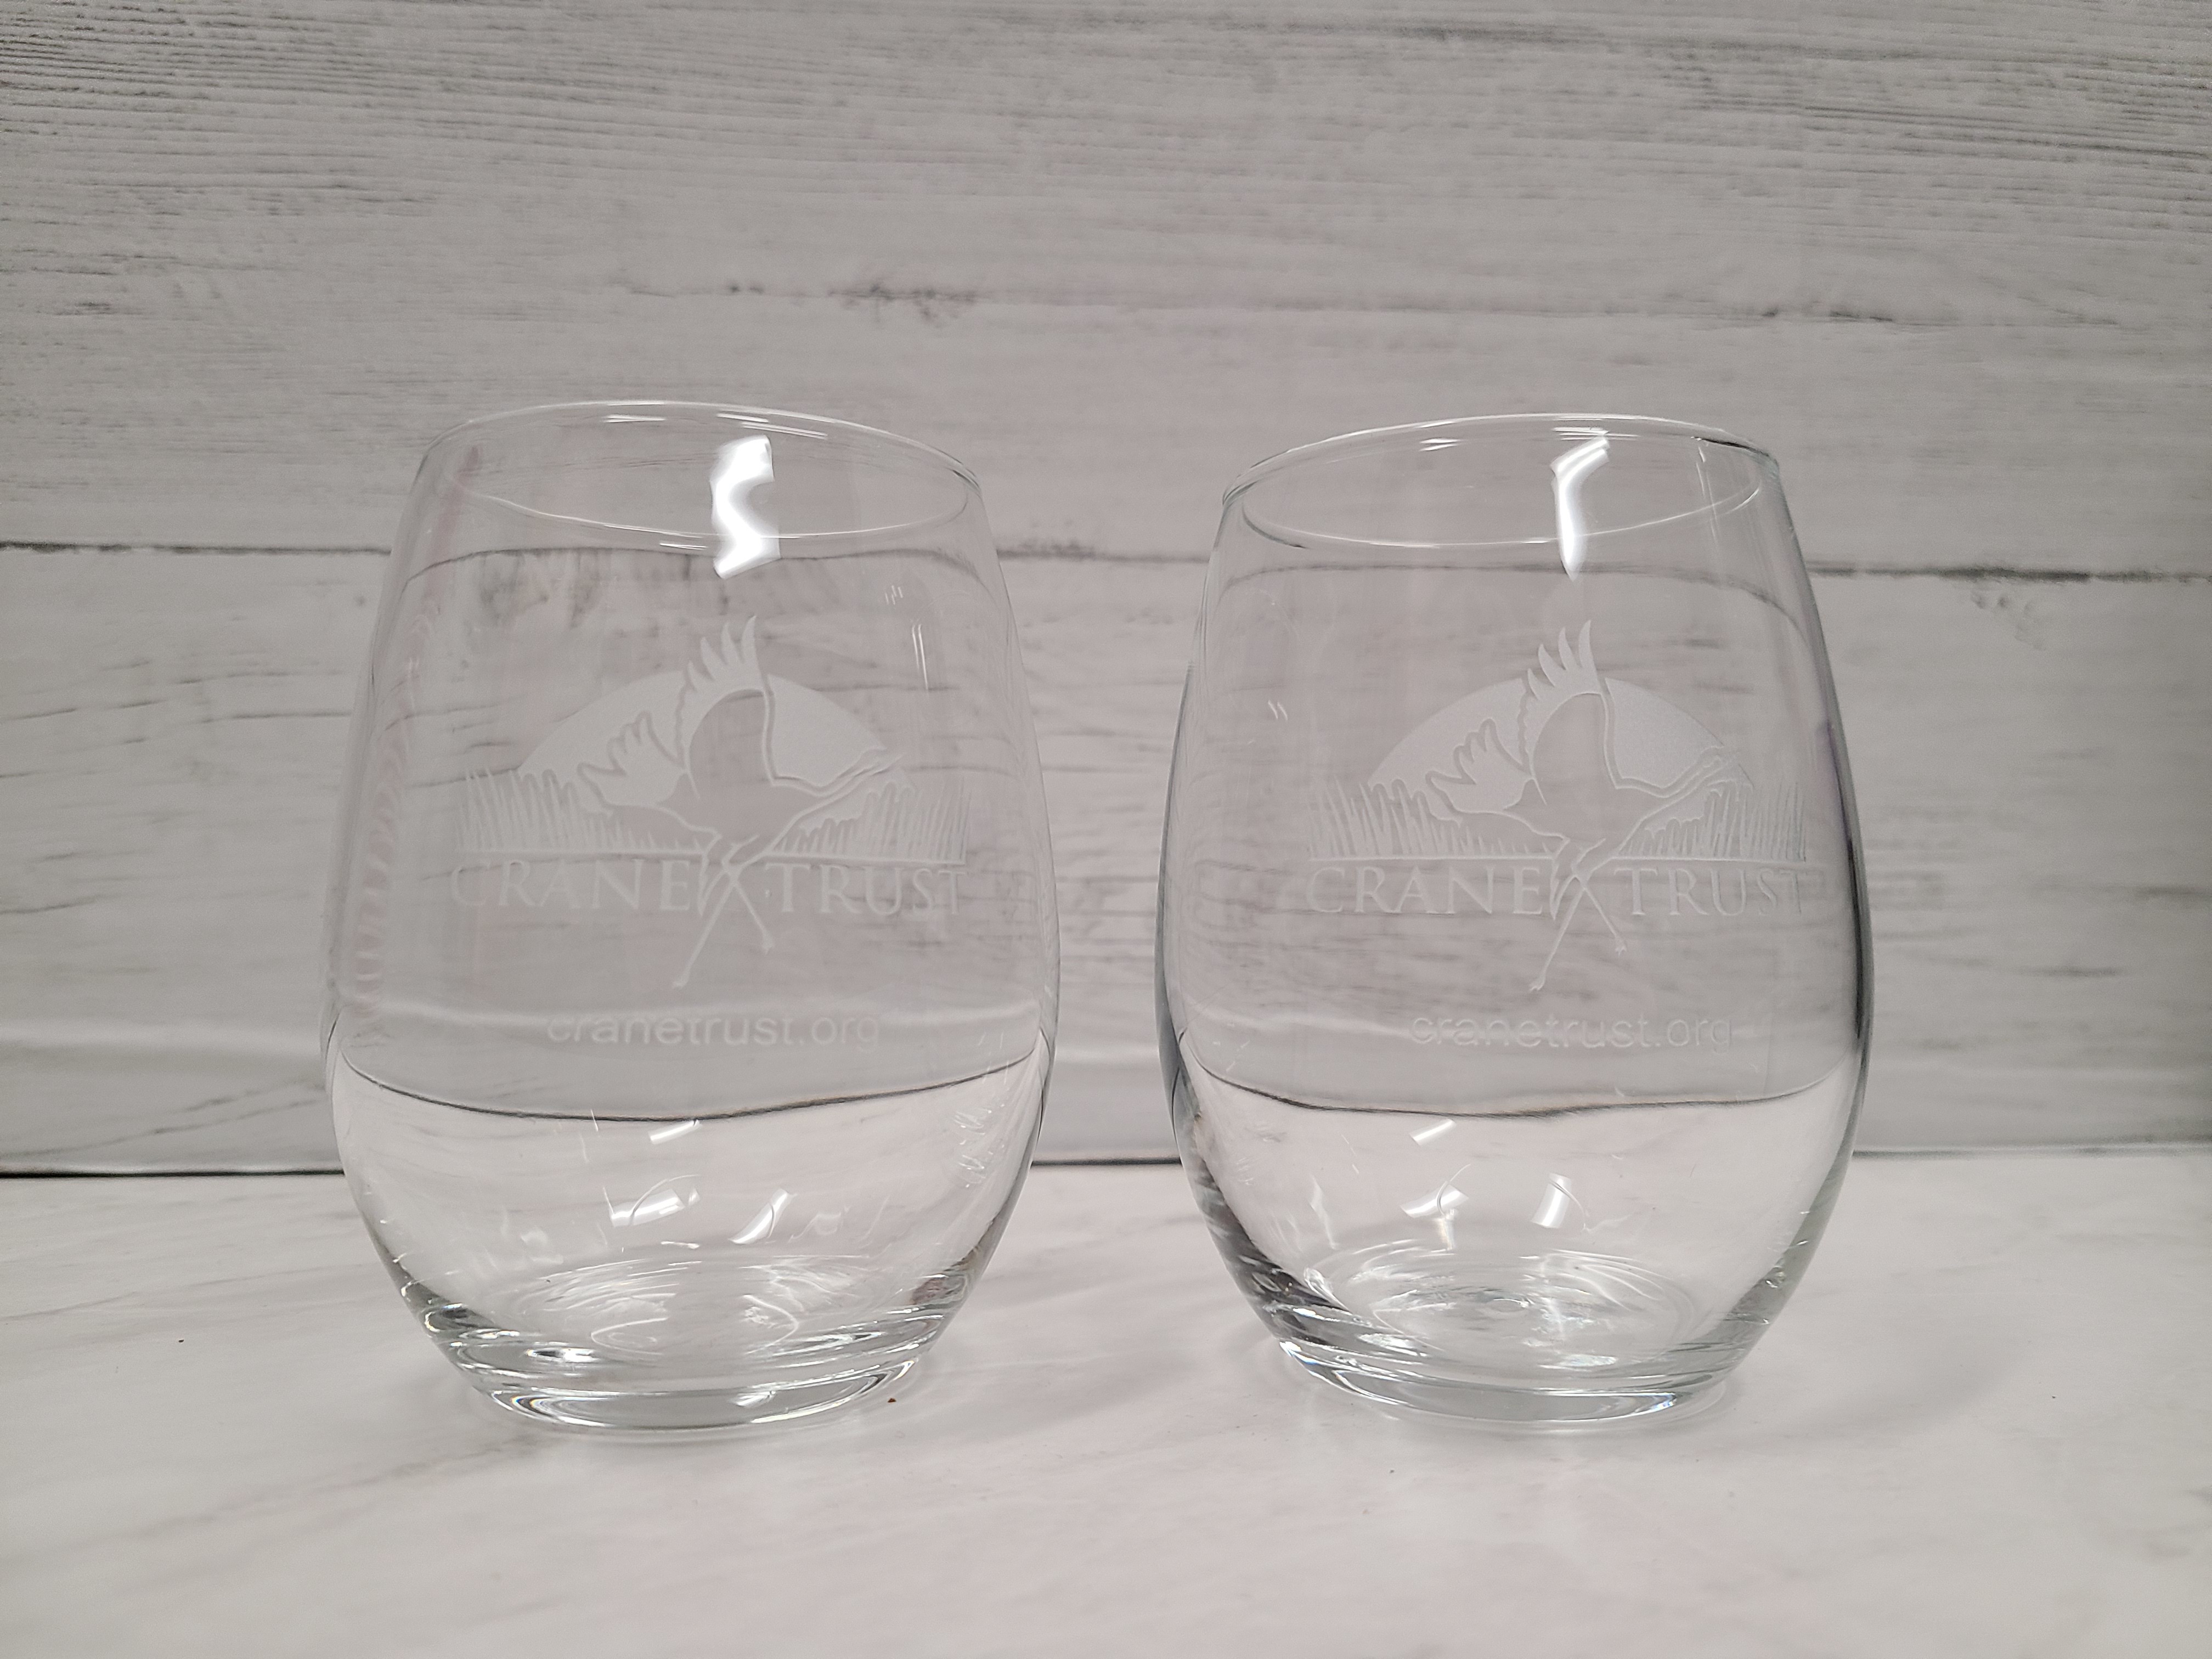 15 oz Stemless Wine Glass Etched with the Crane Trust Logo